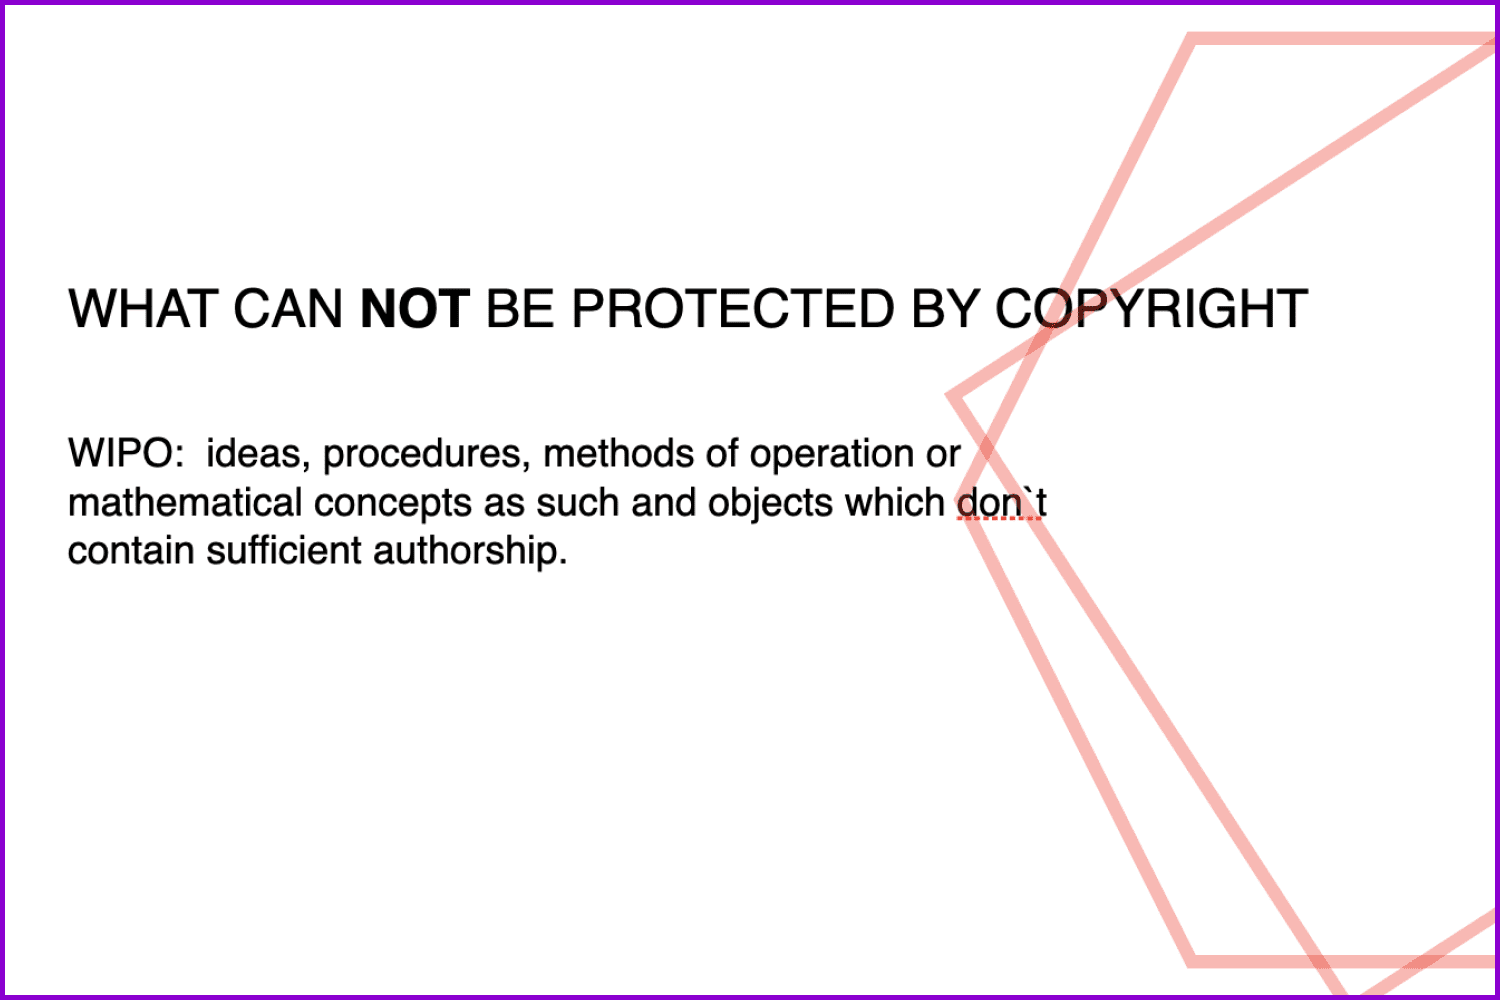 Procedures,methods of operation, concepts also can't be protected with copyright.